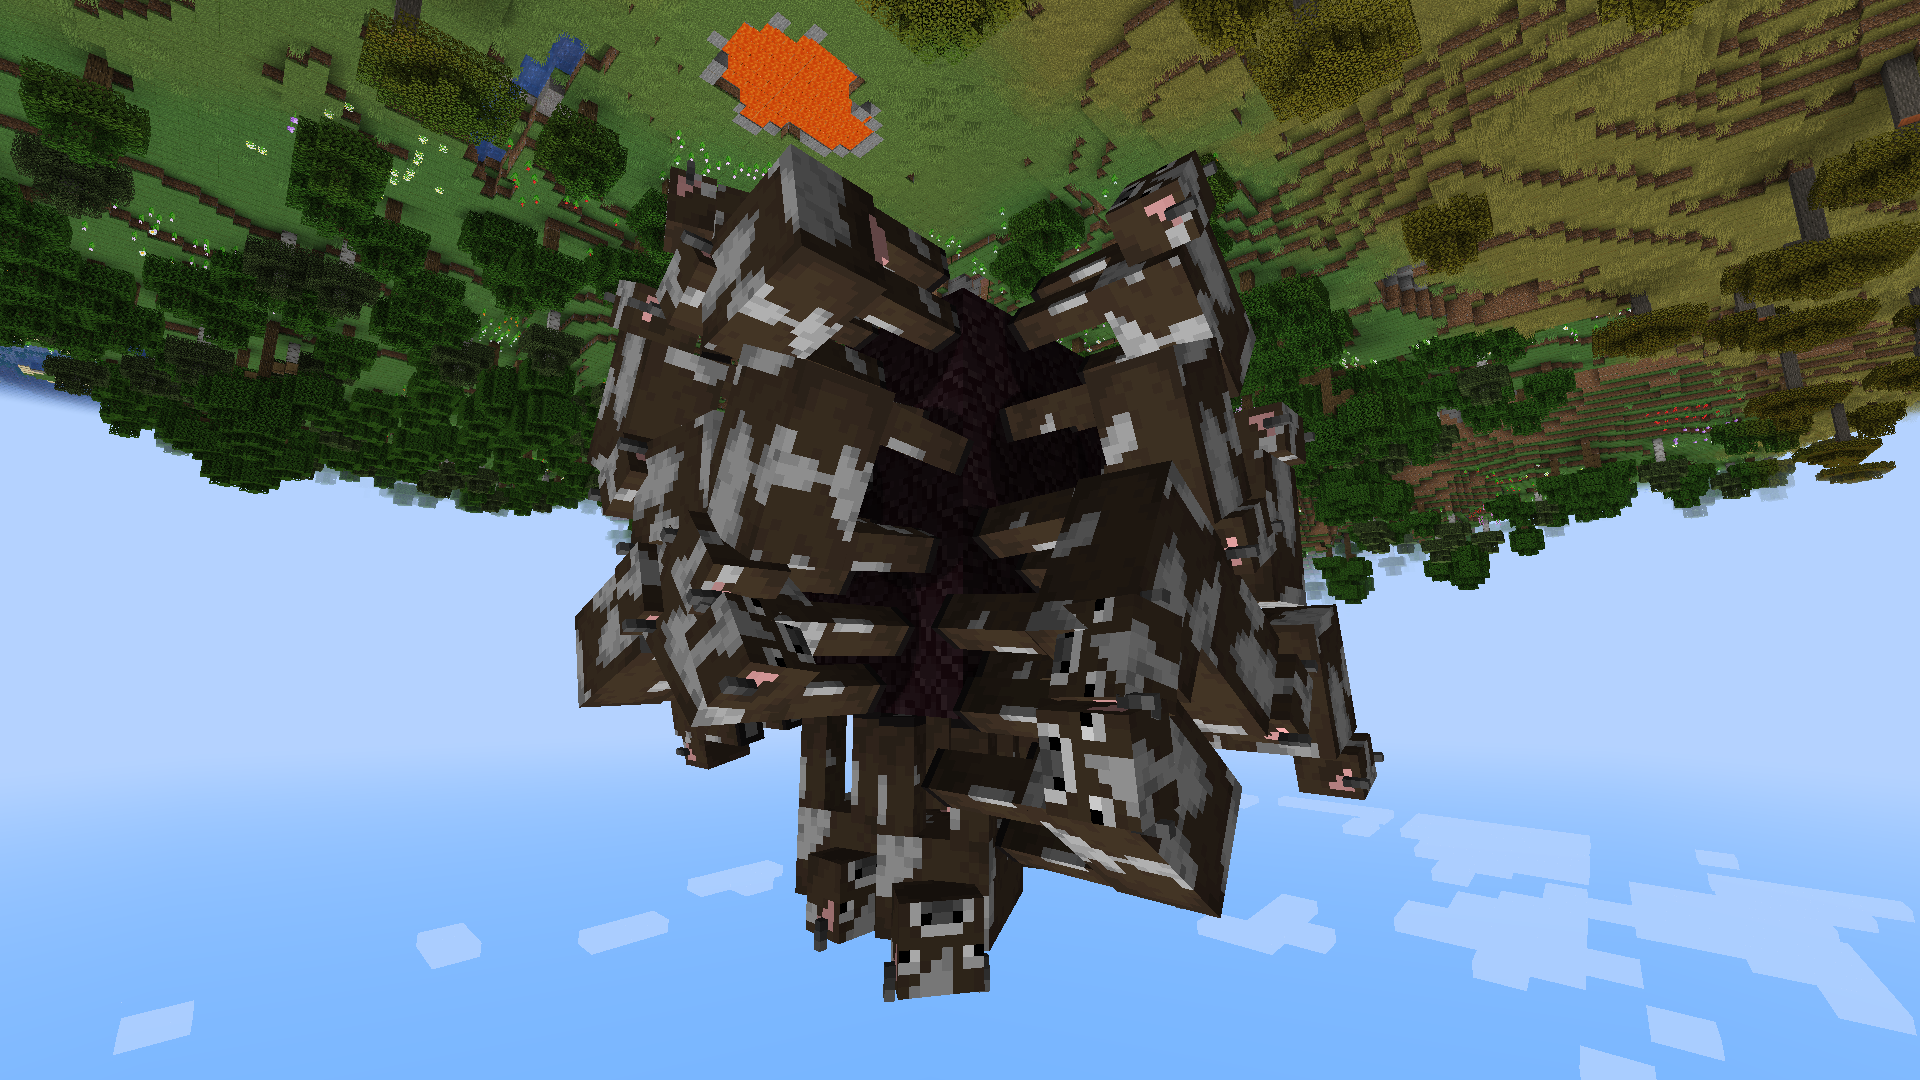 IDK what's happening here
(Lots of cows arround gravity blocks)